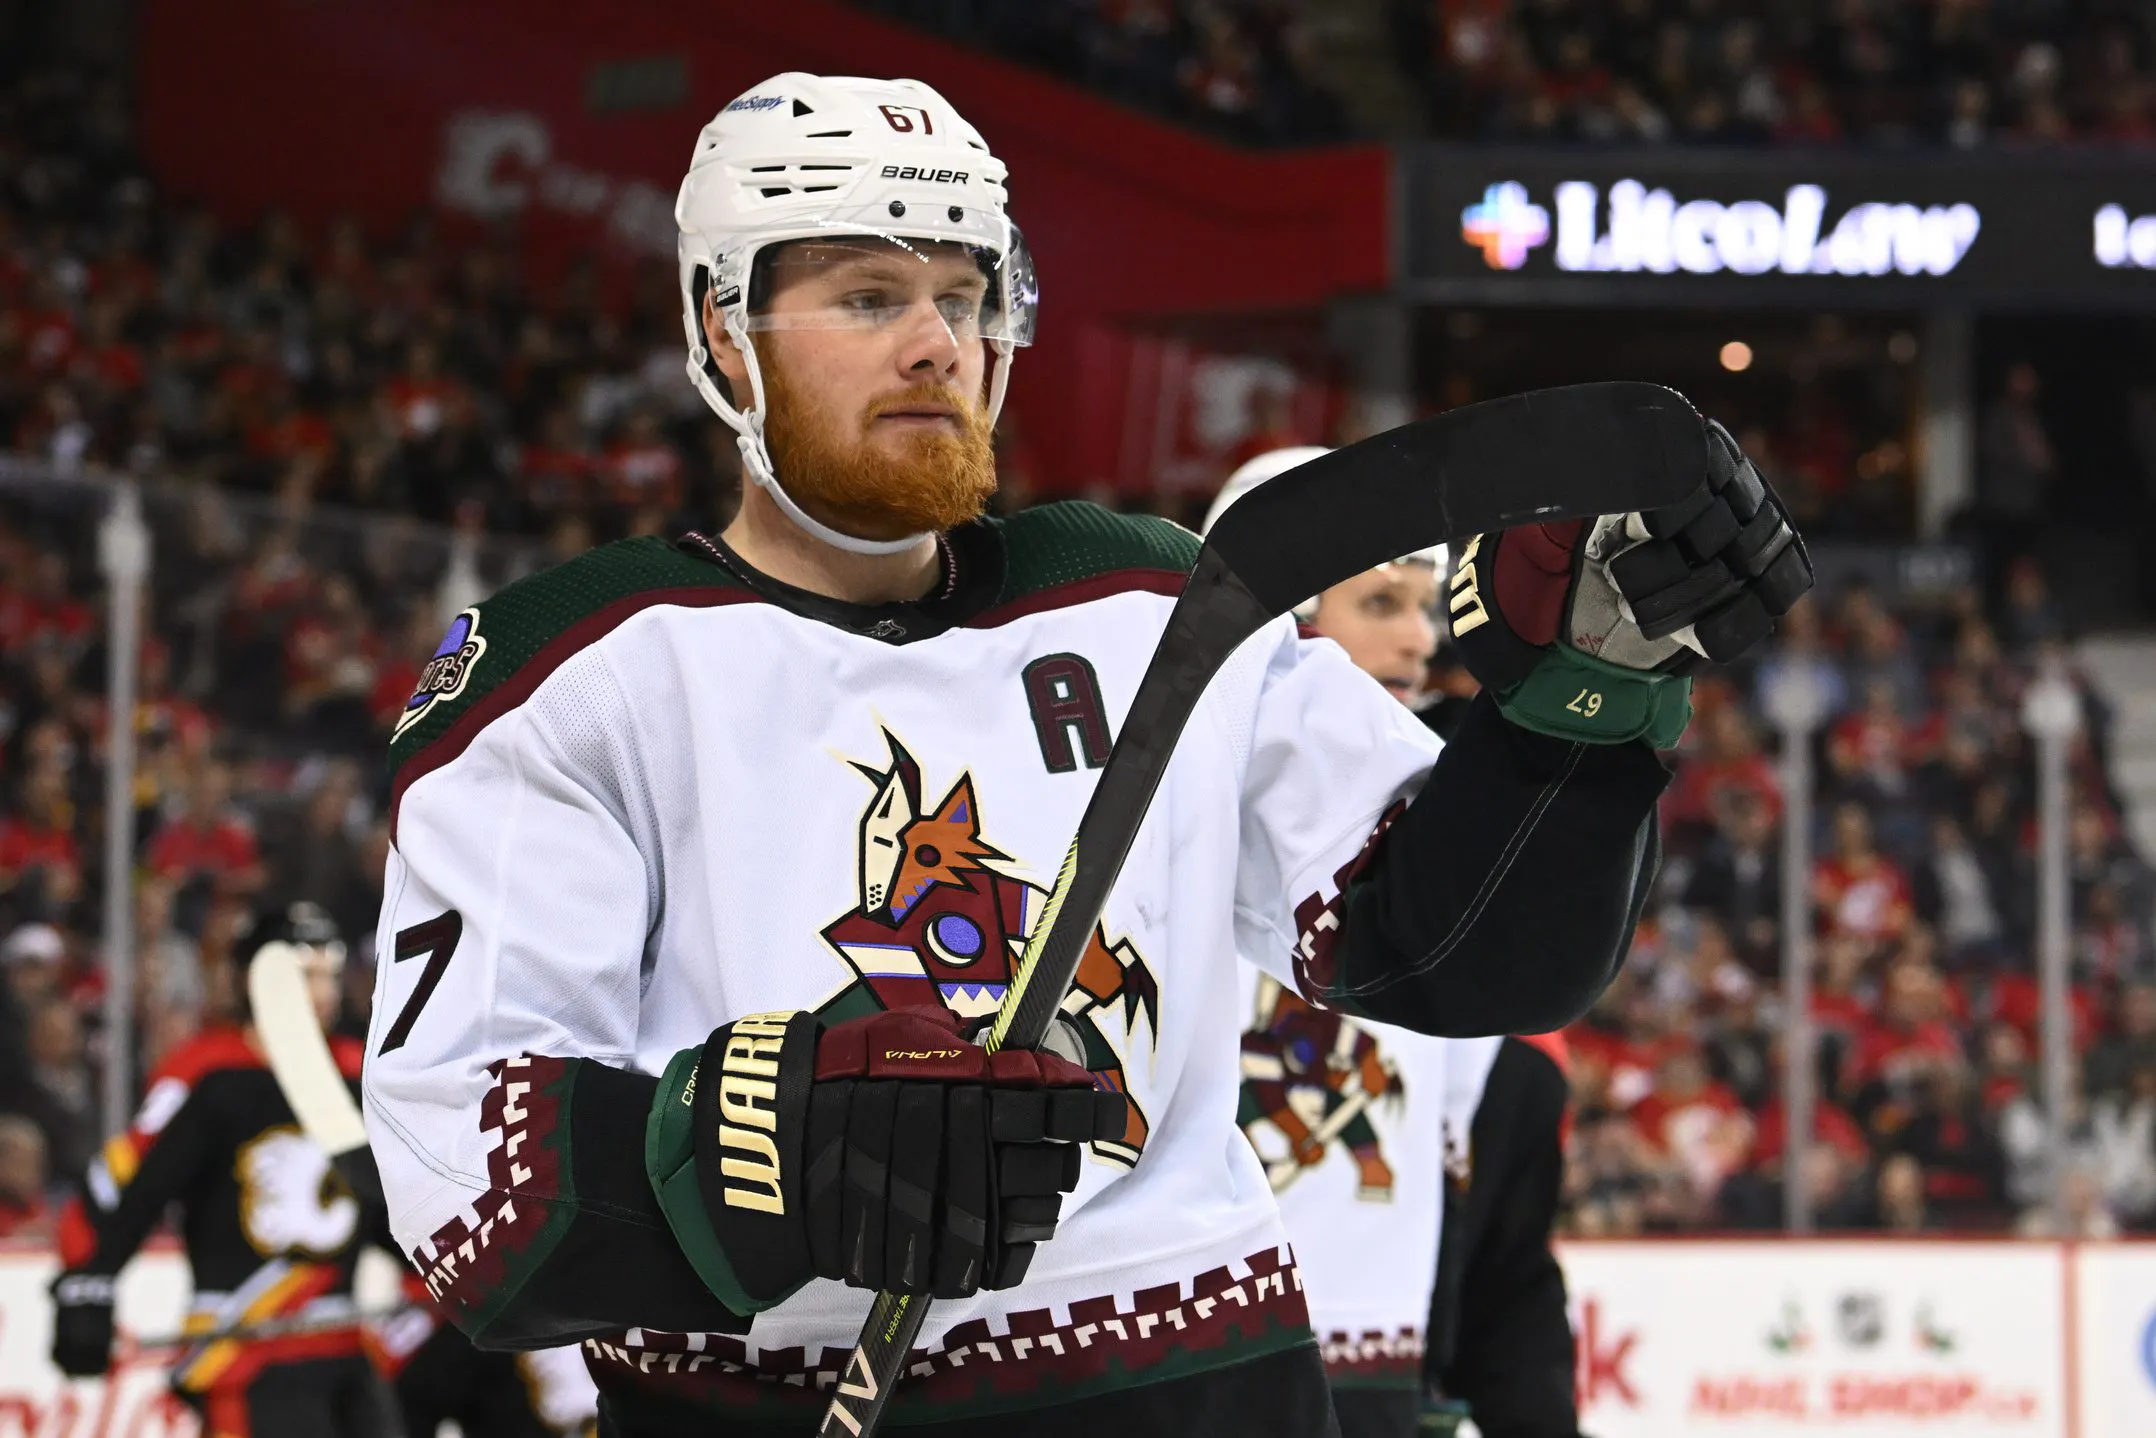 Arizona Coyotes forward Lawson Crouse day-to-day with upper-body injury